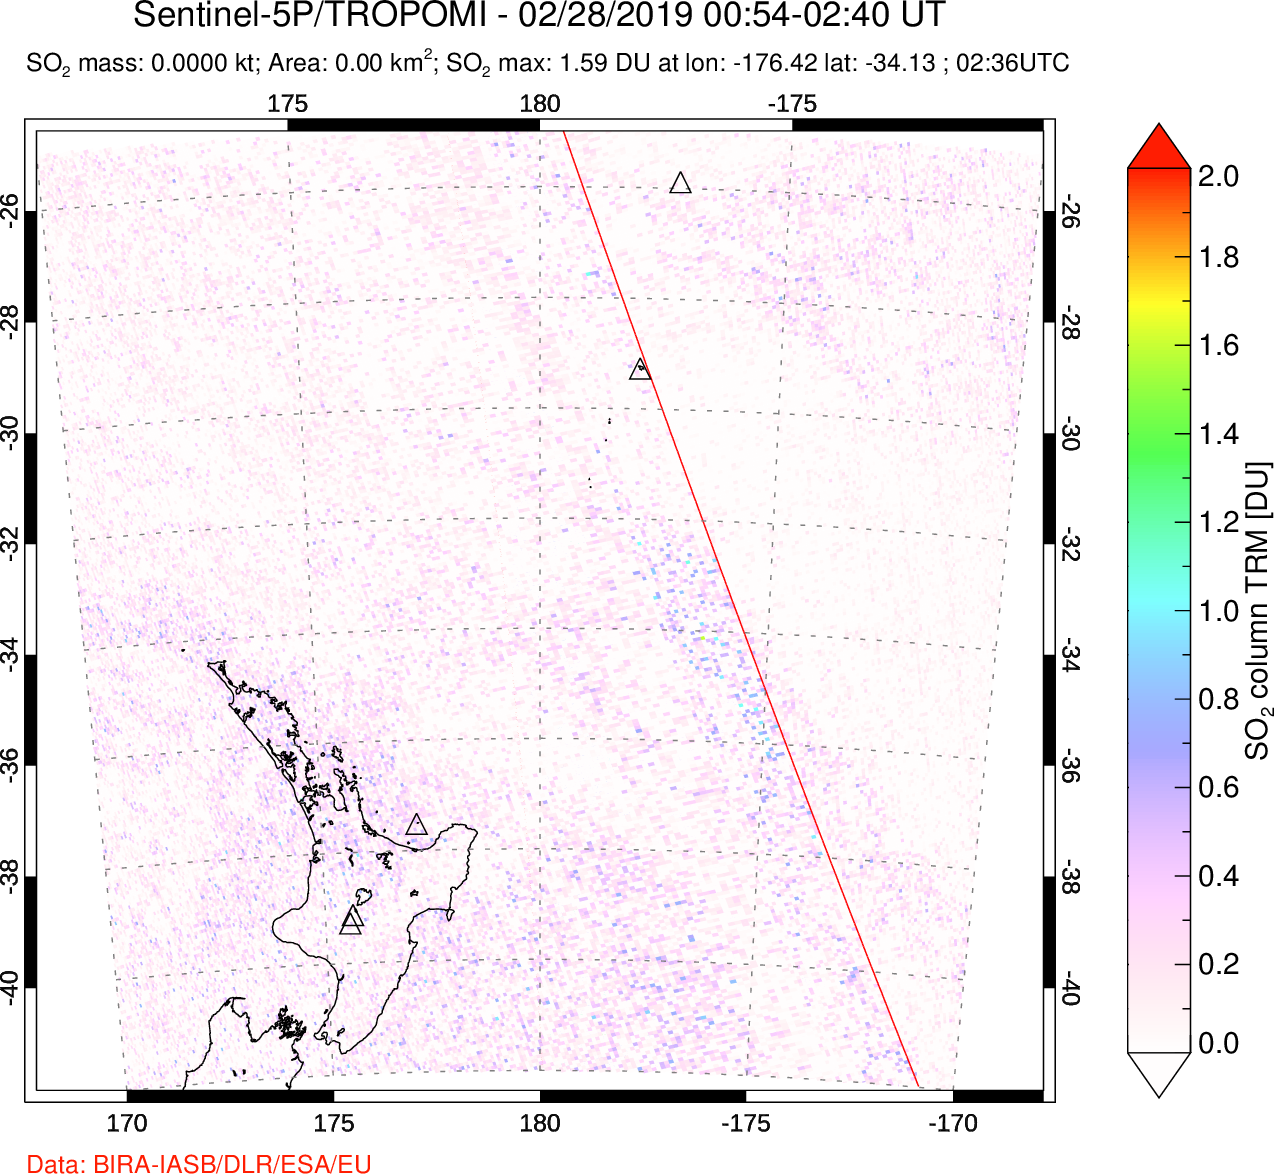 A sulfur dioxide image over New Zealand on Feb 28, 2019.